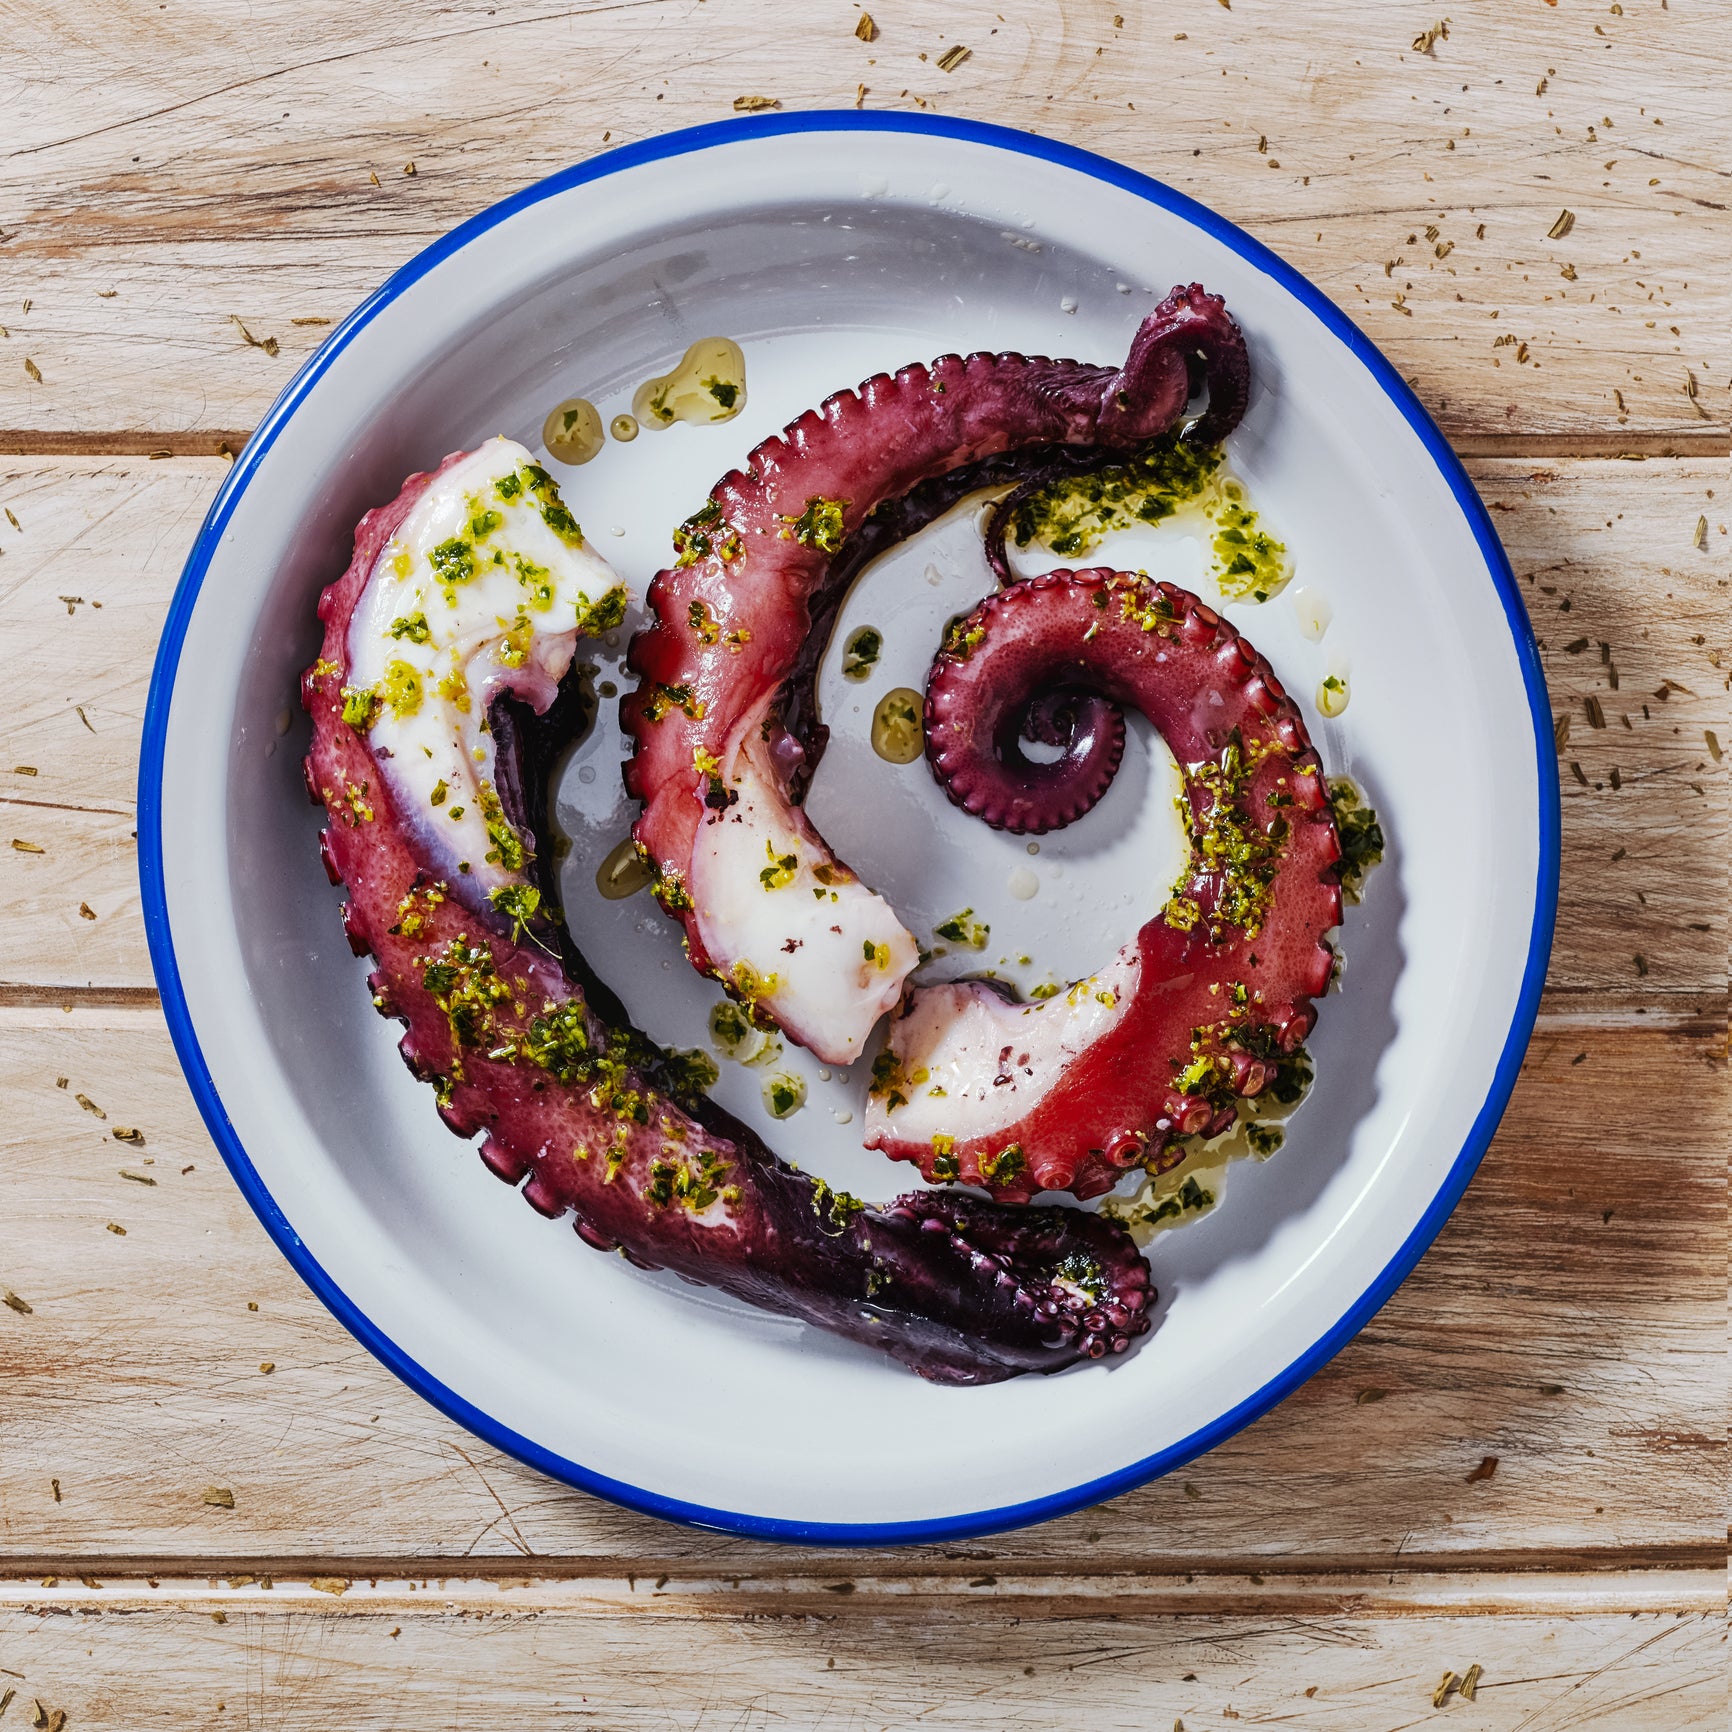 A freshly prepared grilled octopus dish, beautifully presented with charred tentacles and garnished with lemon slices and herbs, showcasing the delicious result of properly cooked seafood